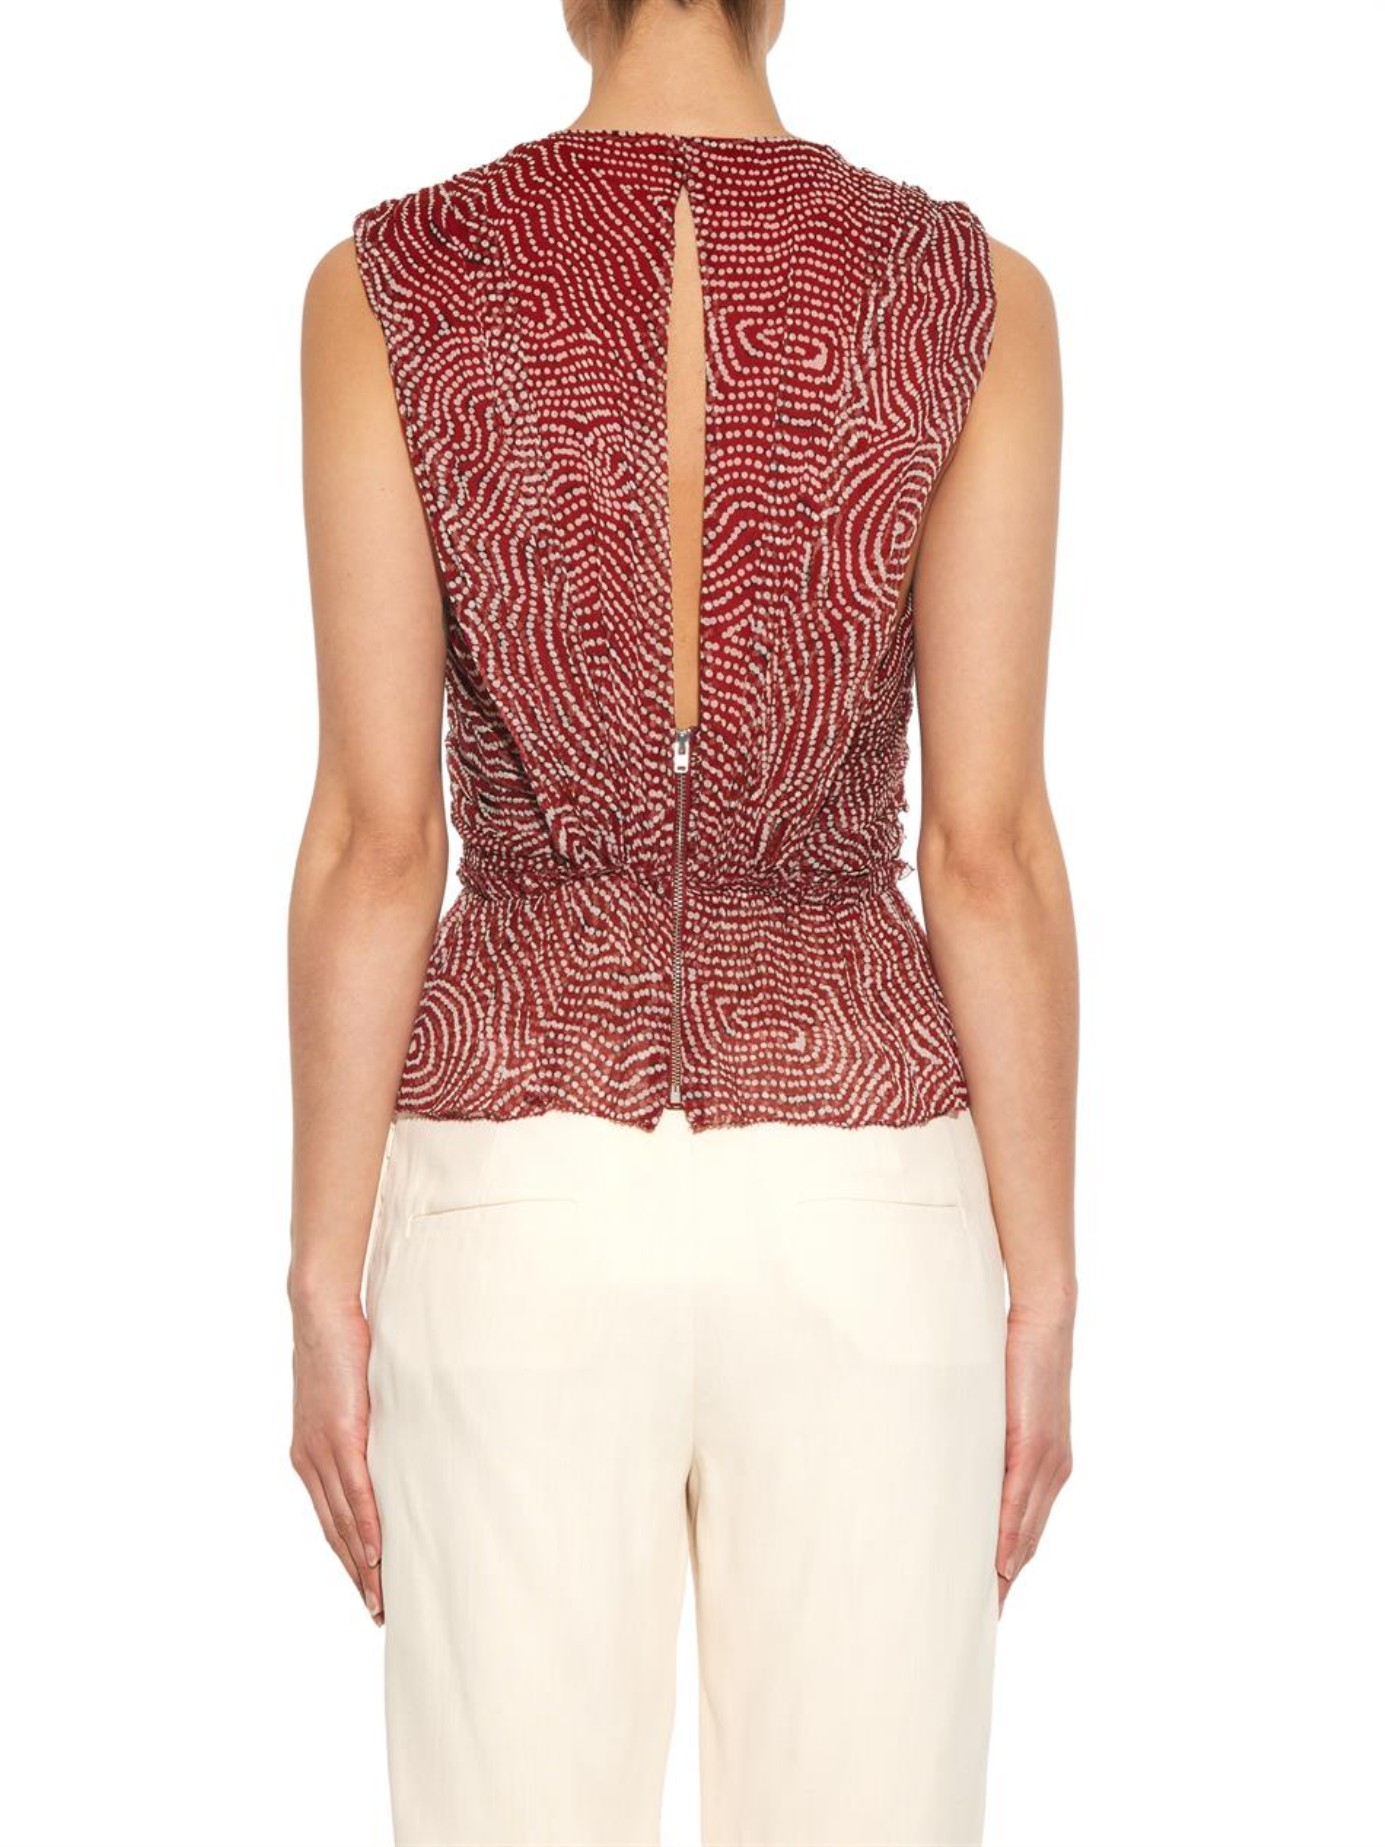 Isabel Marant Moddy Ruffle-front Top in Burgundy - Lyst